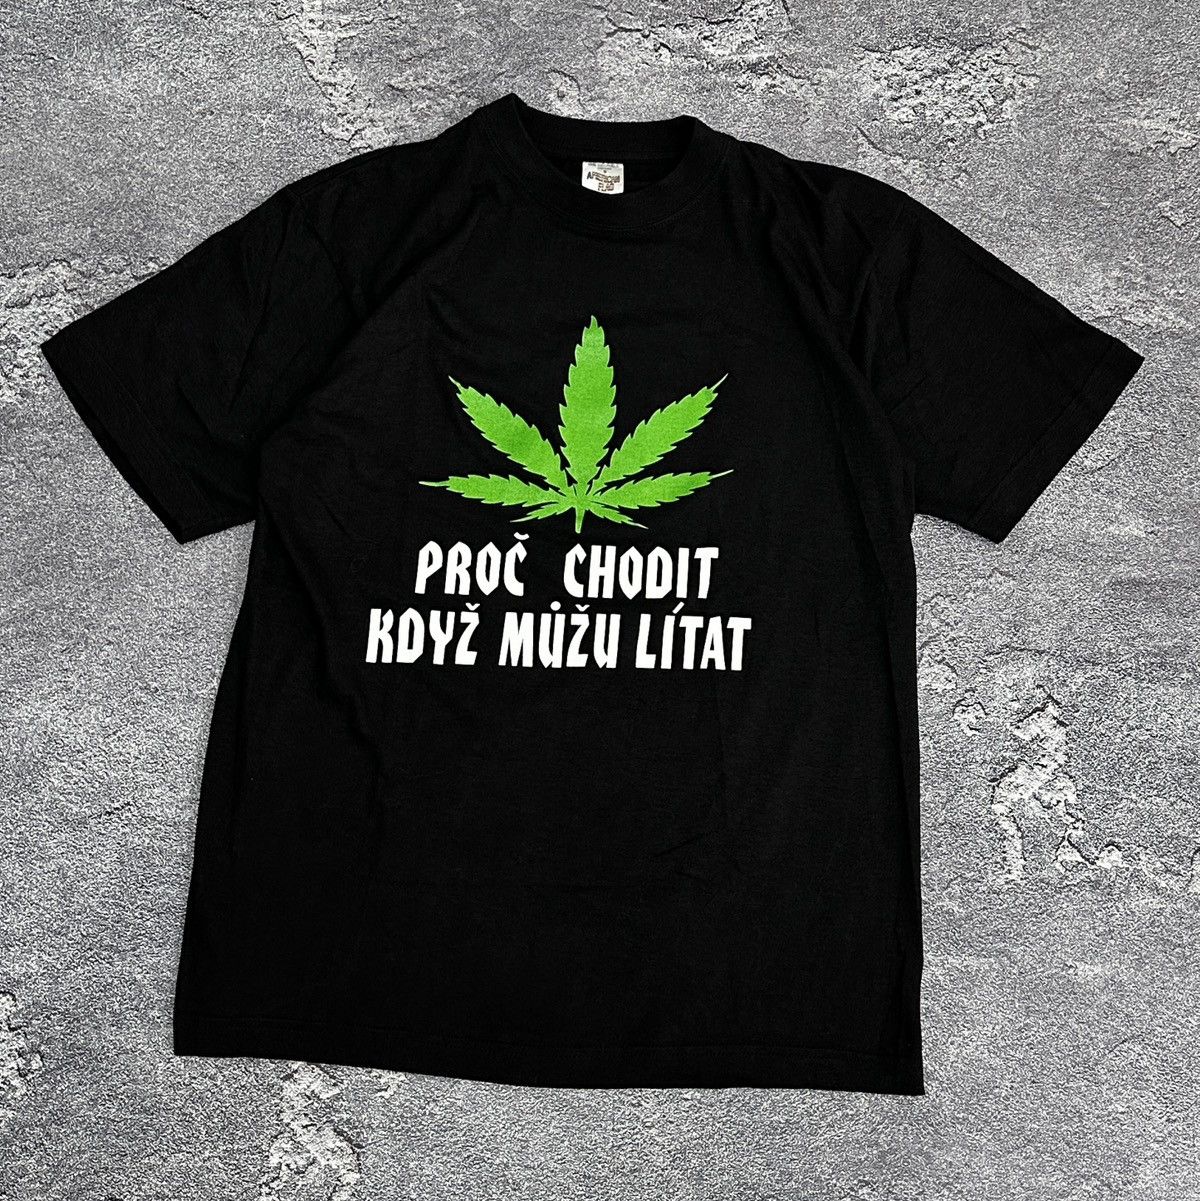 Pre-owned Humor X Vintage Marijuana Why Walk When I Can Fly?t-shirt Japan Y2k In Black